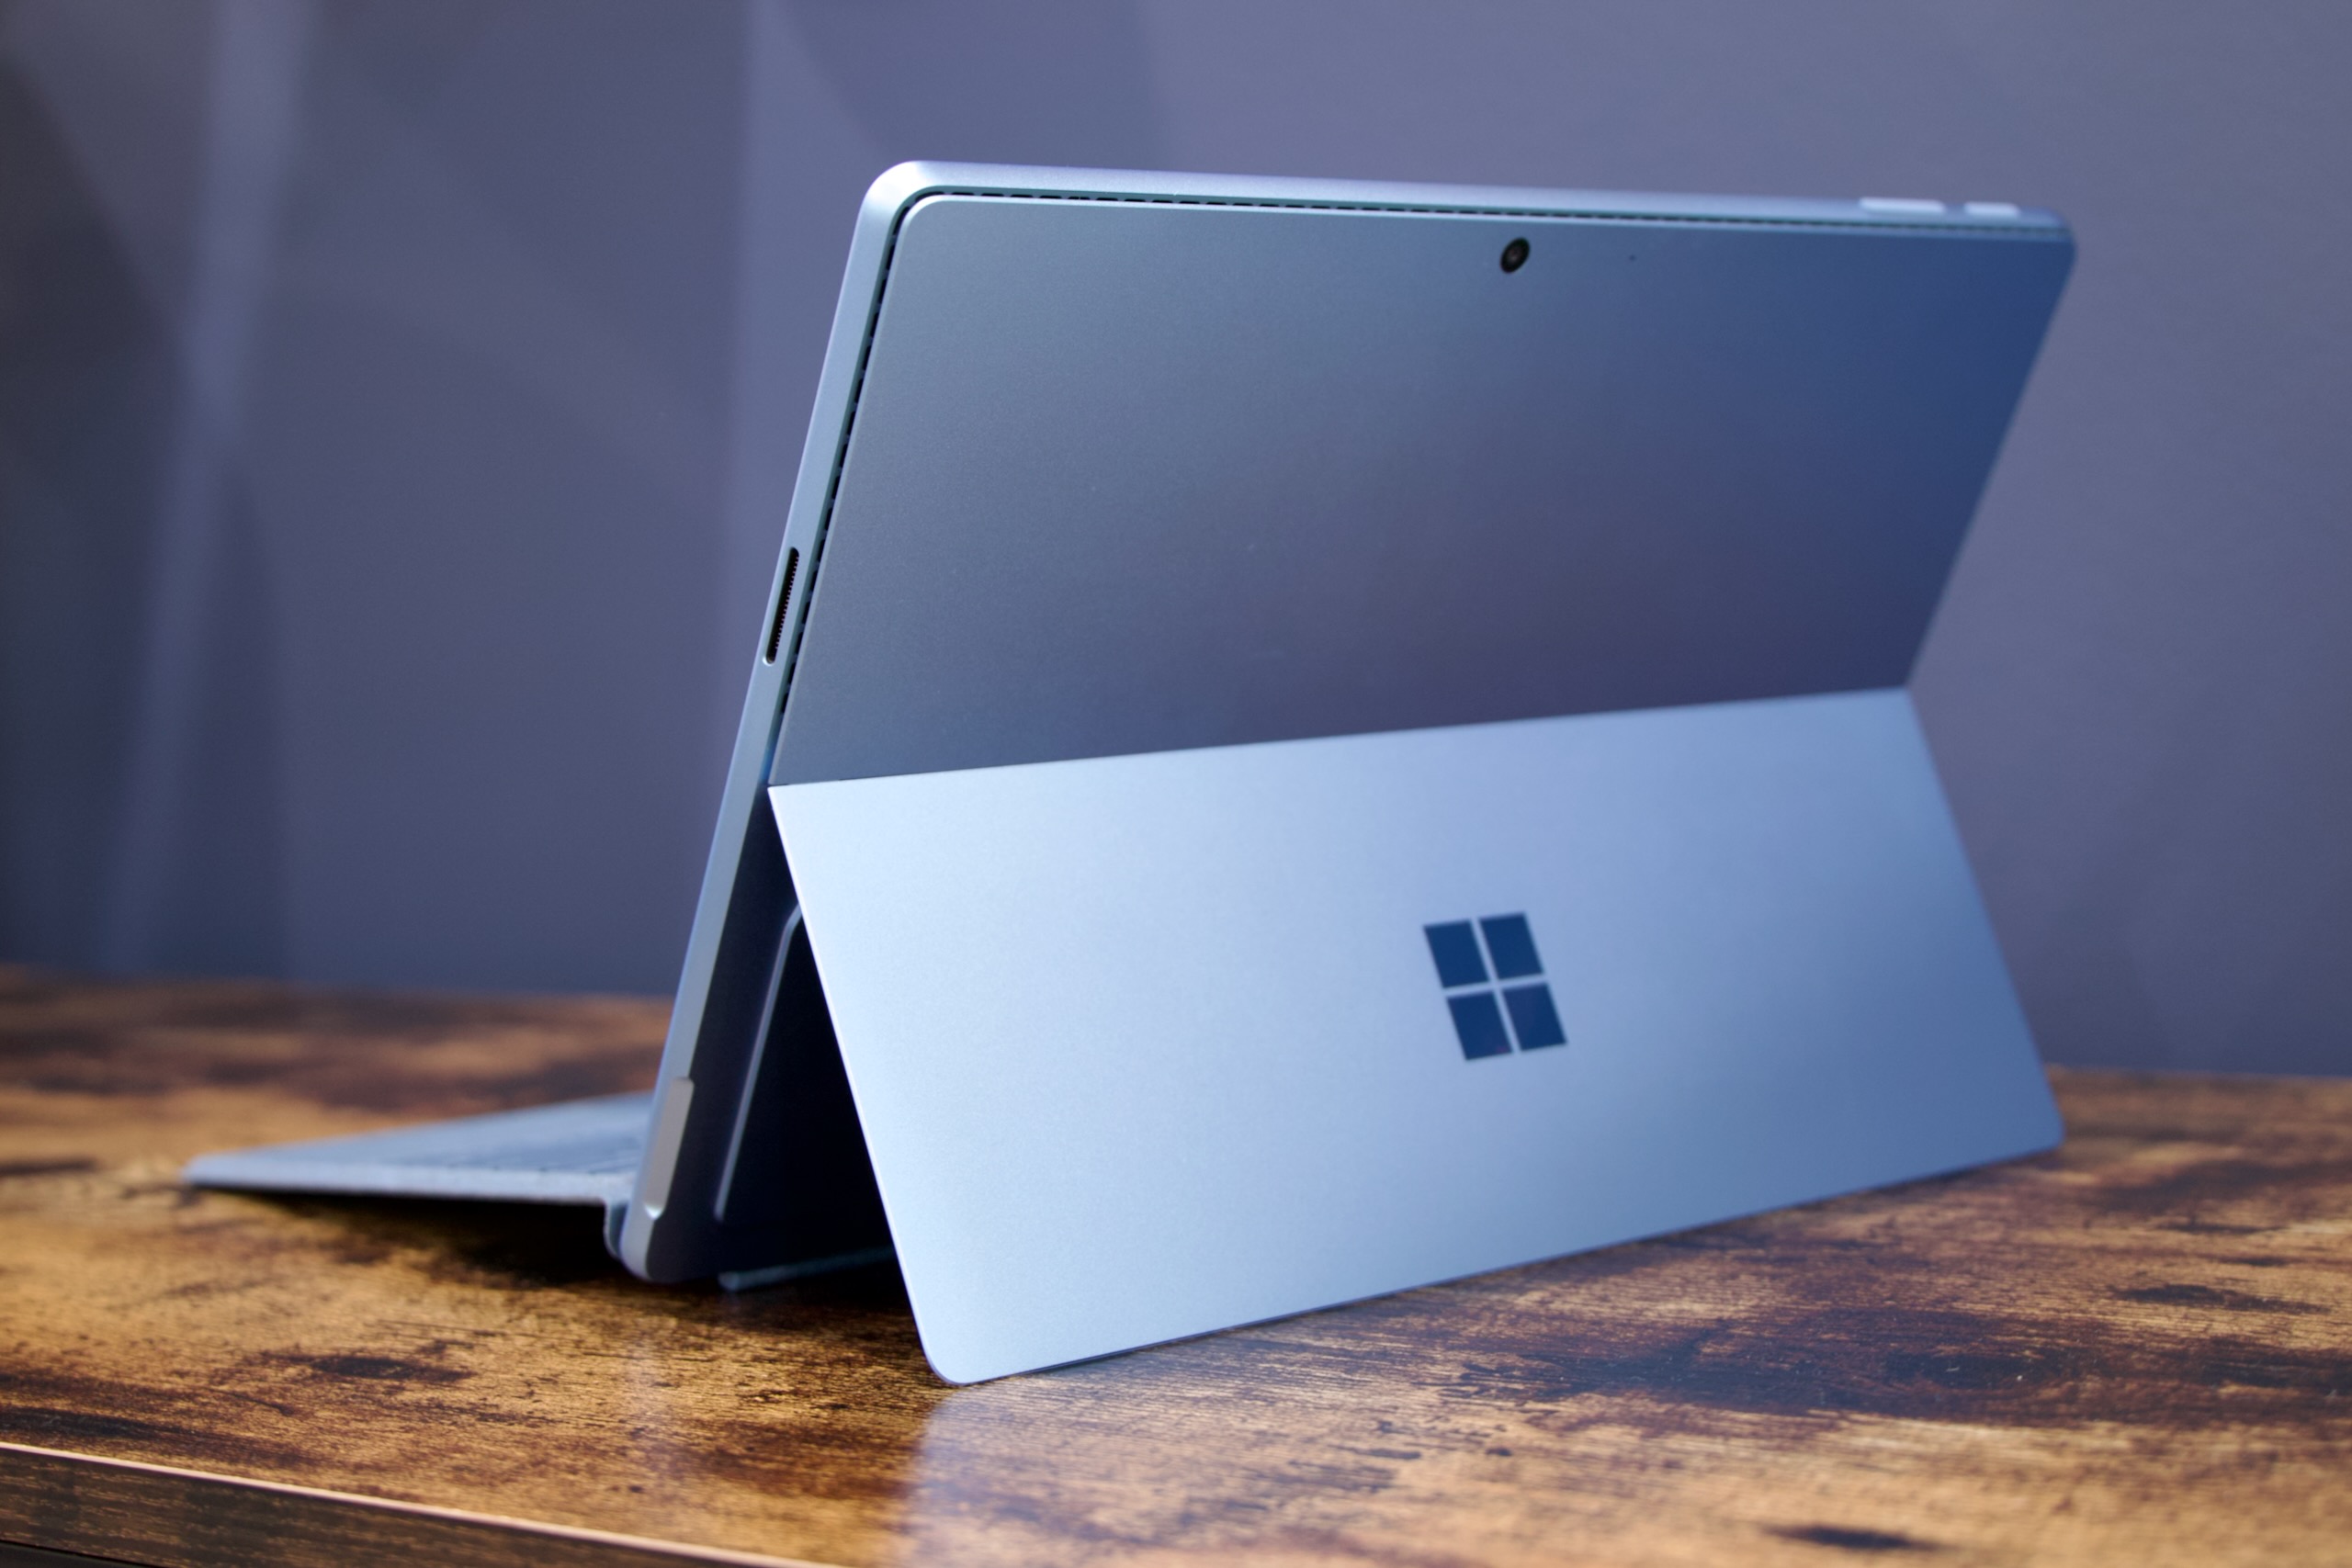 Microsoft Surface Pro 9 Review - IGN